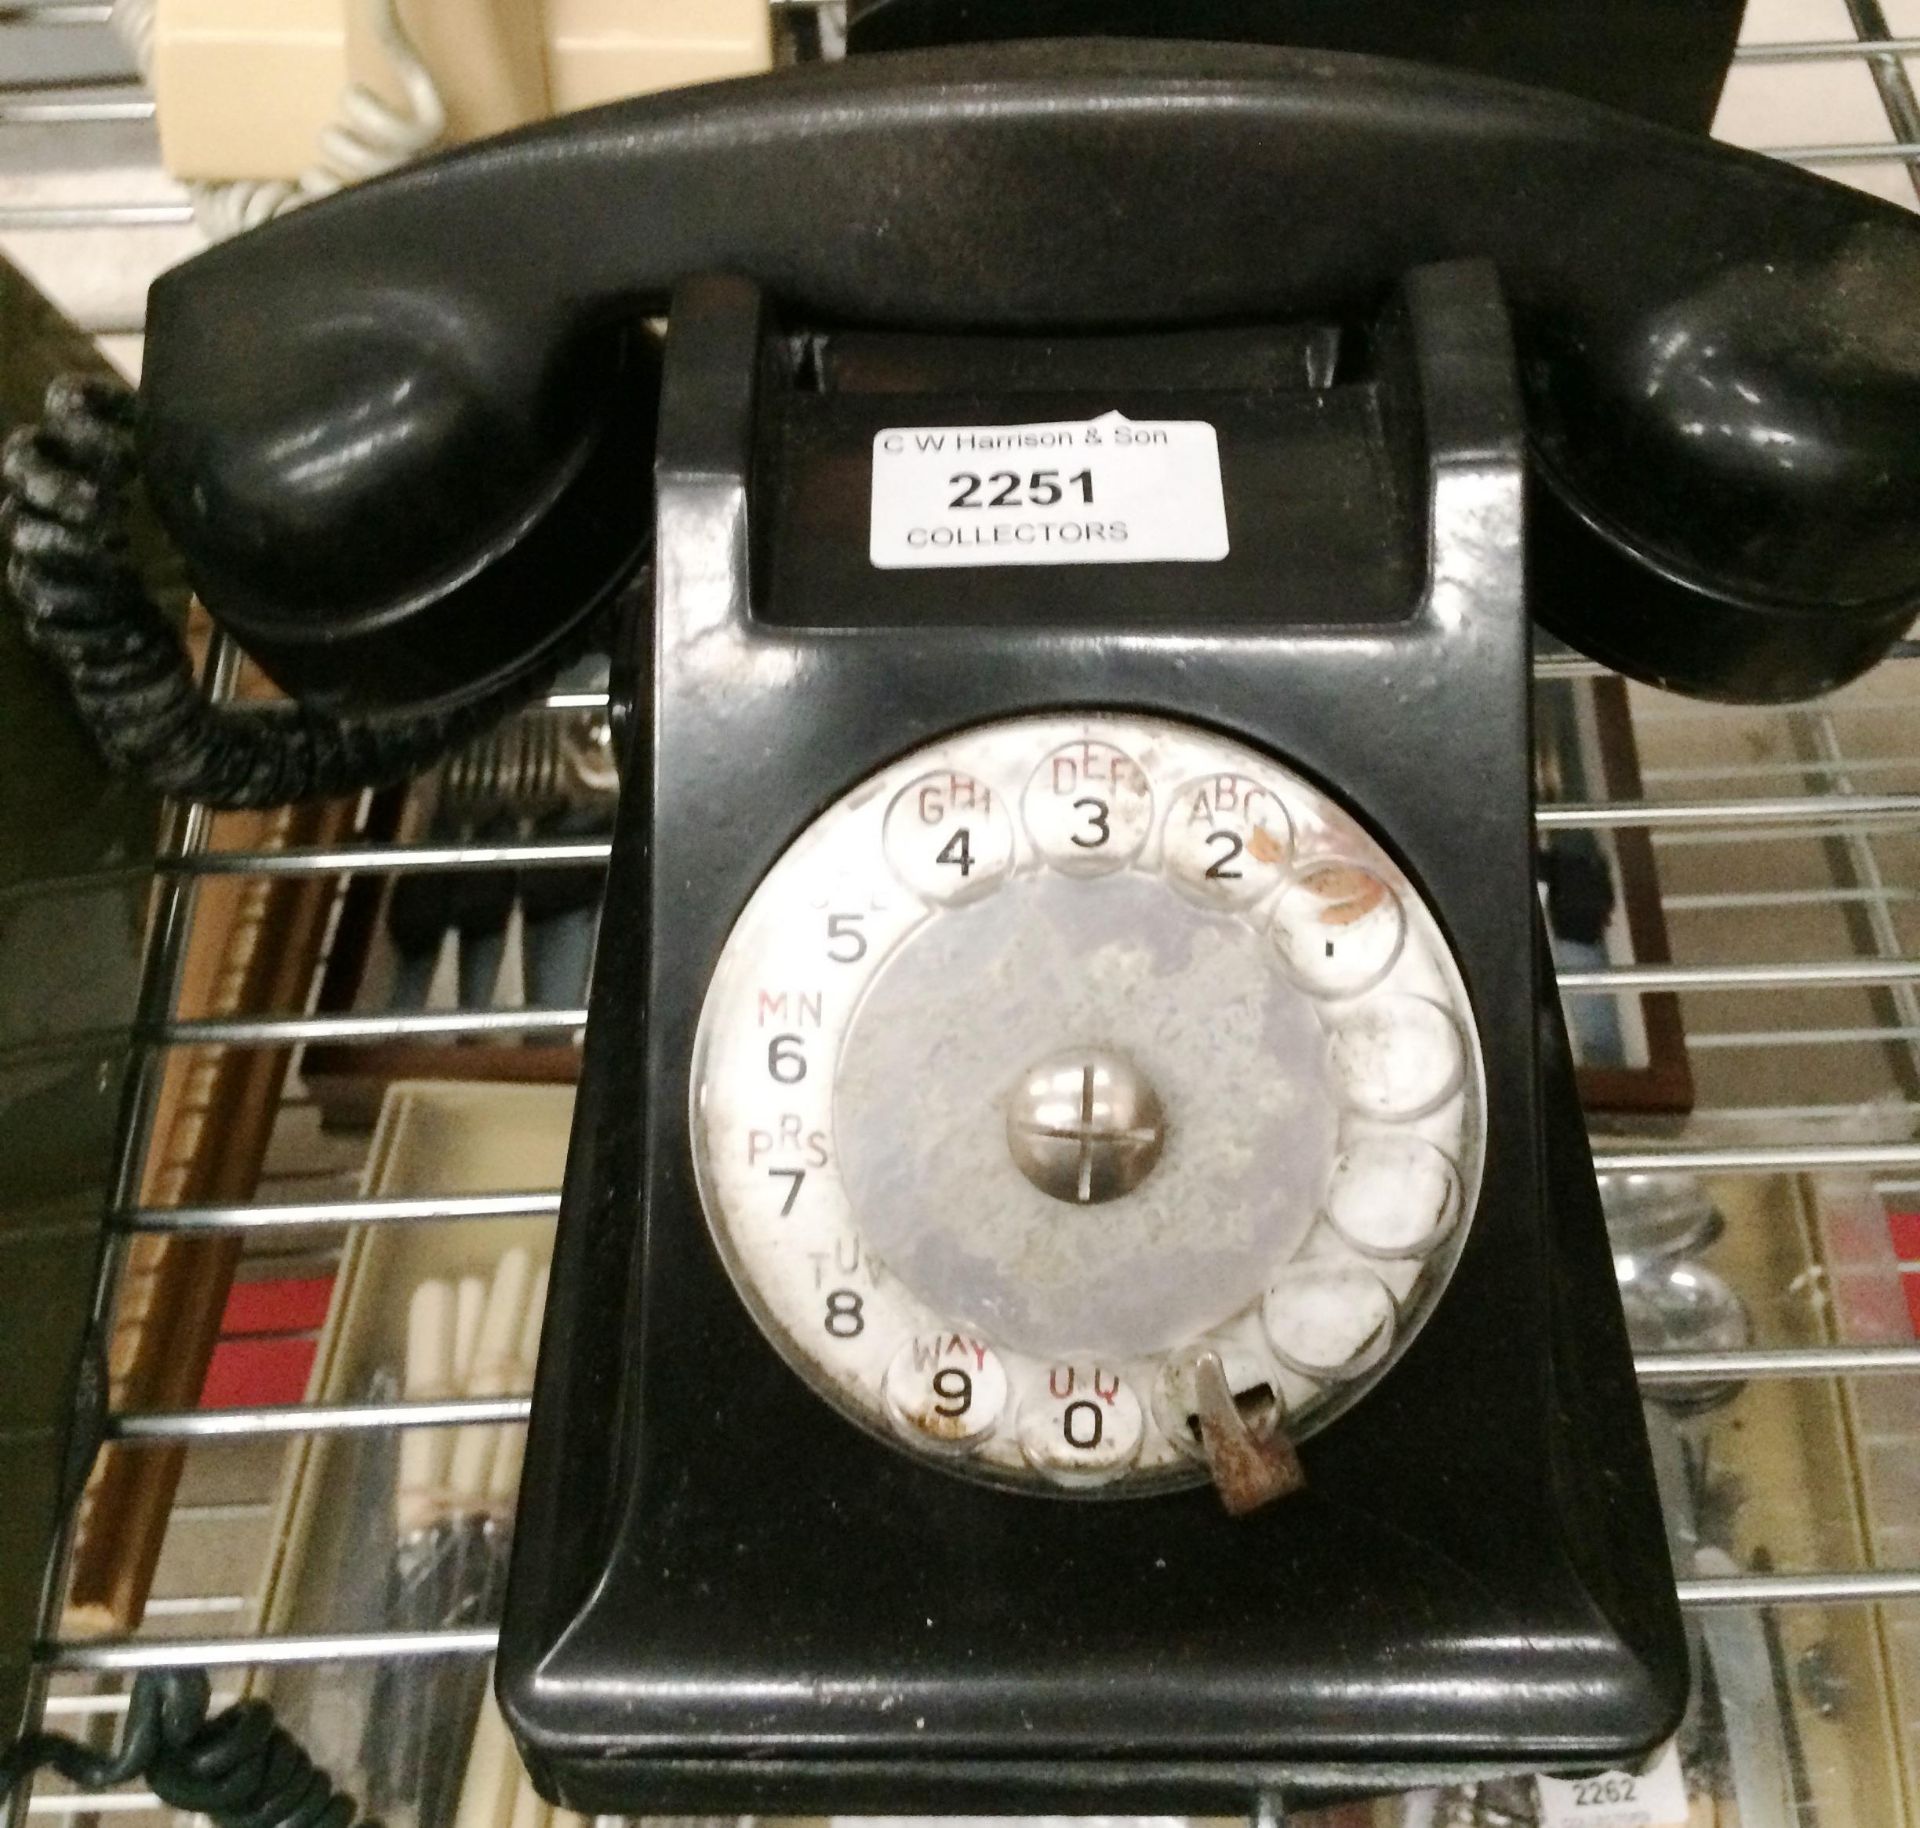 A black bakelite telephone - for use as a prop only - damage to front